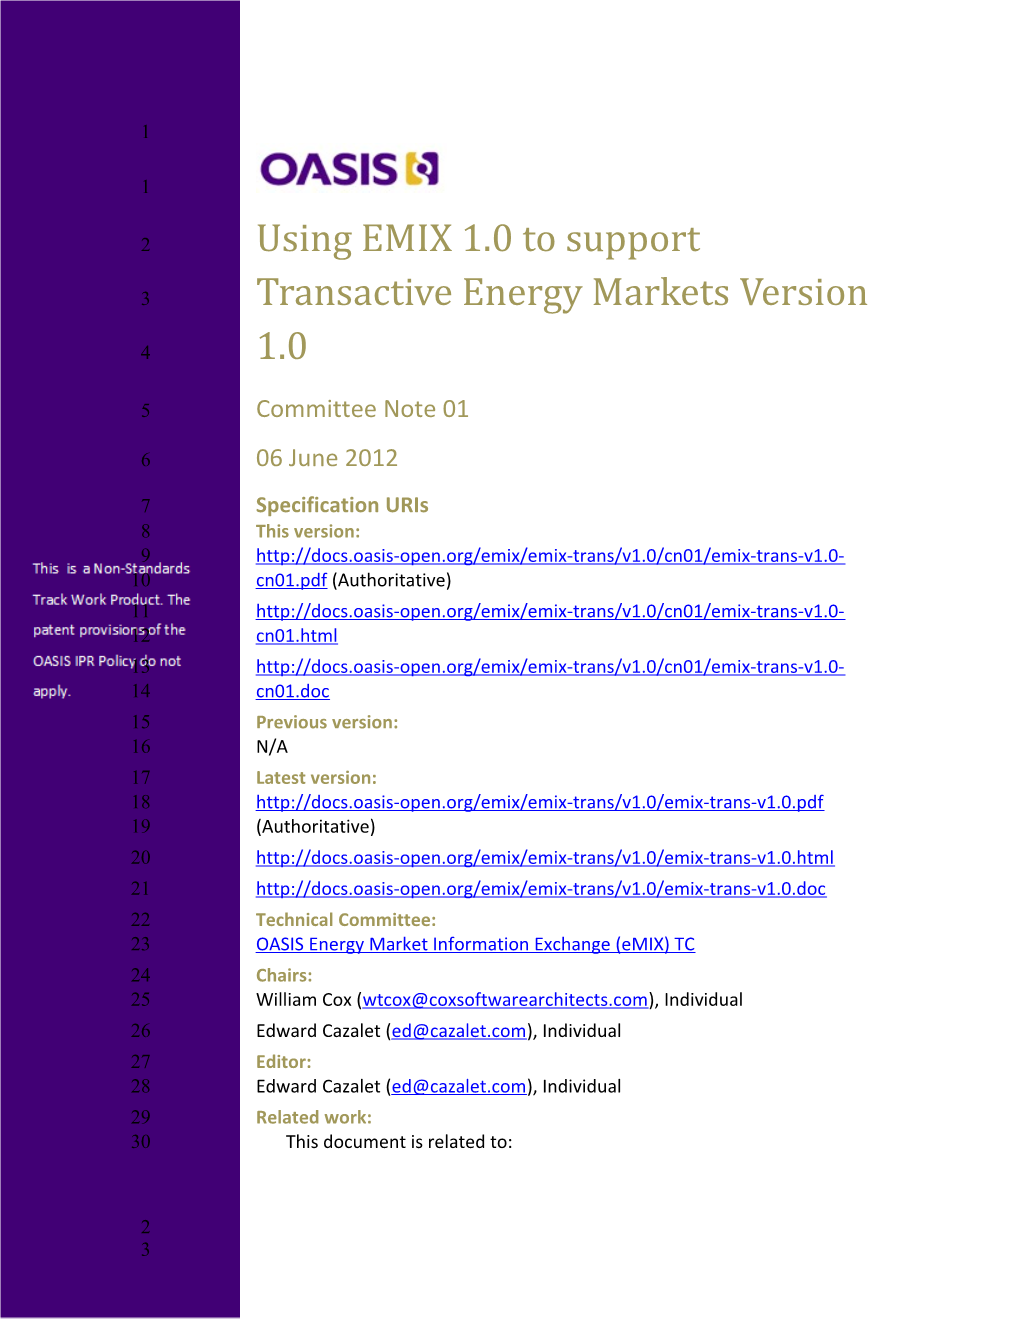 Using EMIX 1.0 to Support Transactive Energy Markets Version 1.0